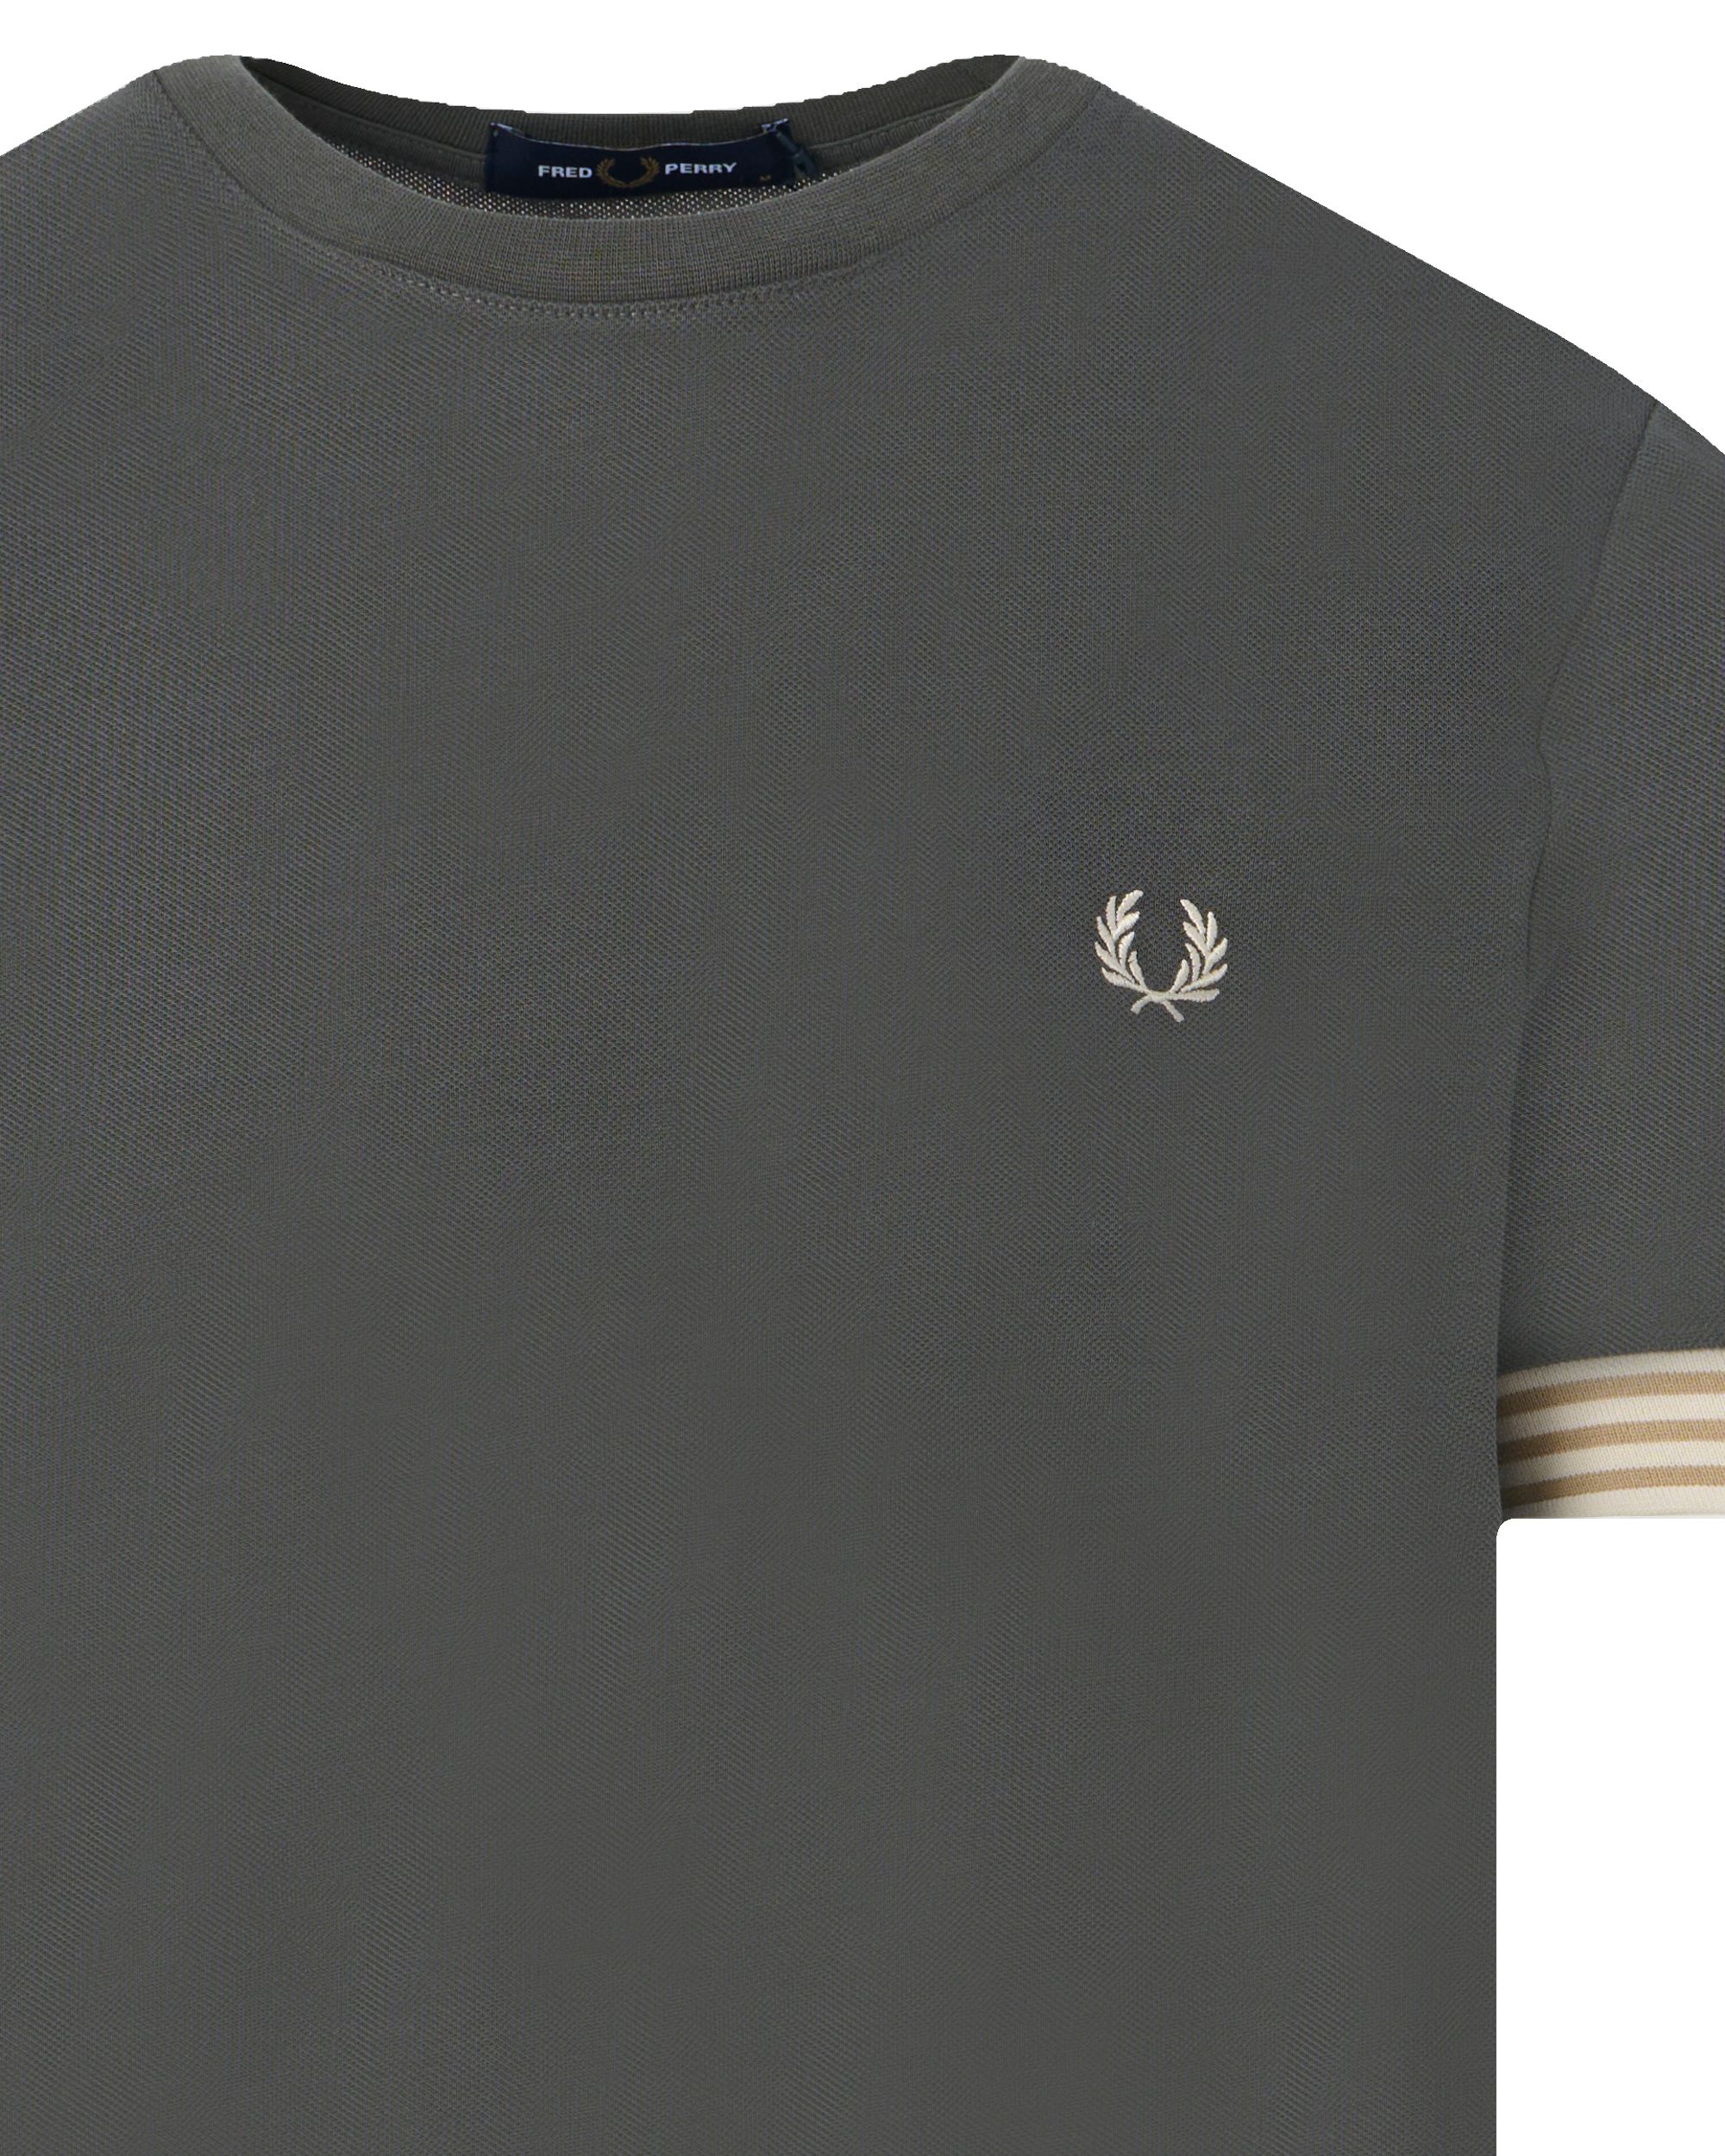 Fred Perry T-shirt KM Groen 091965-001-S